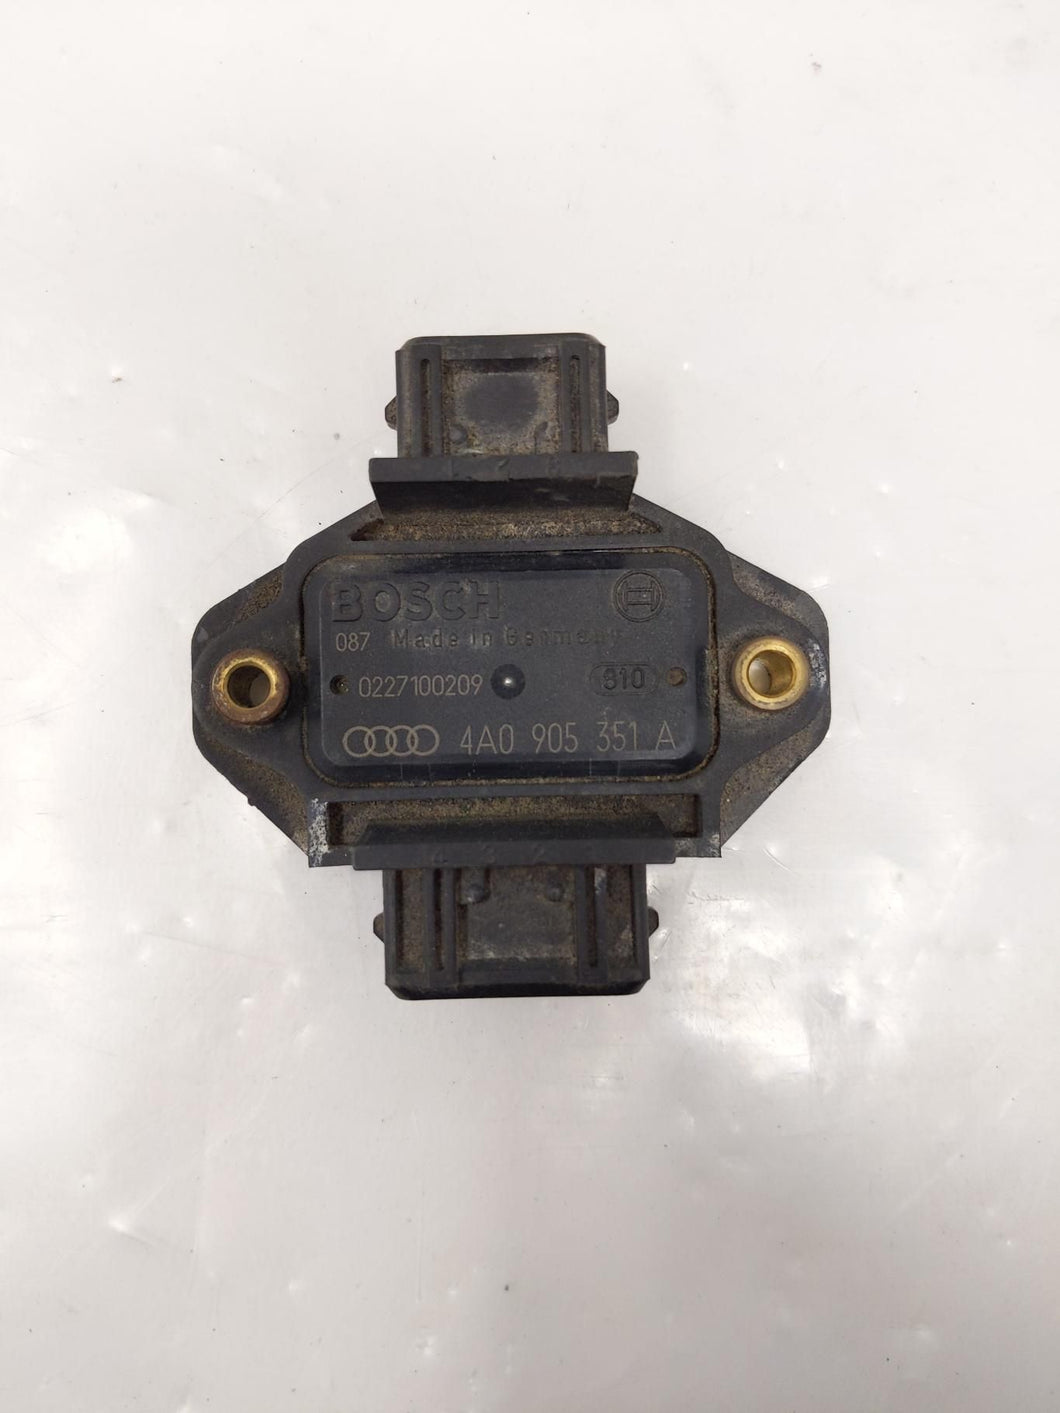 IGNITION MODULE Audi 100 A4 A6 92 93 94 95 96 97 98 - NW58877